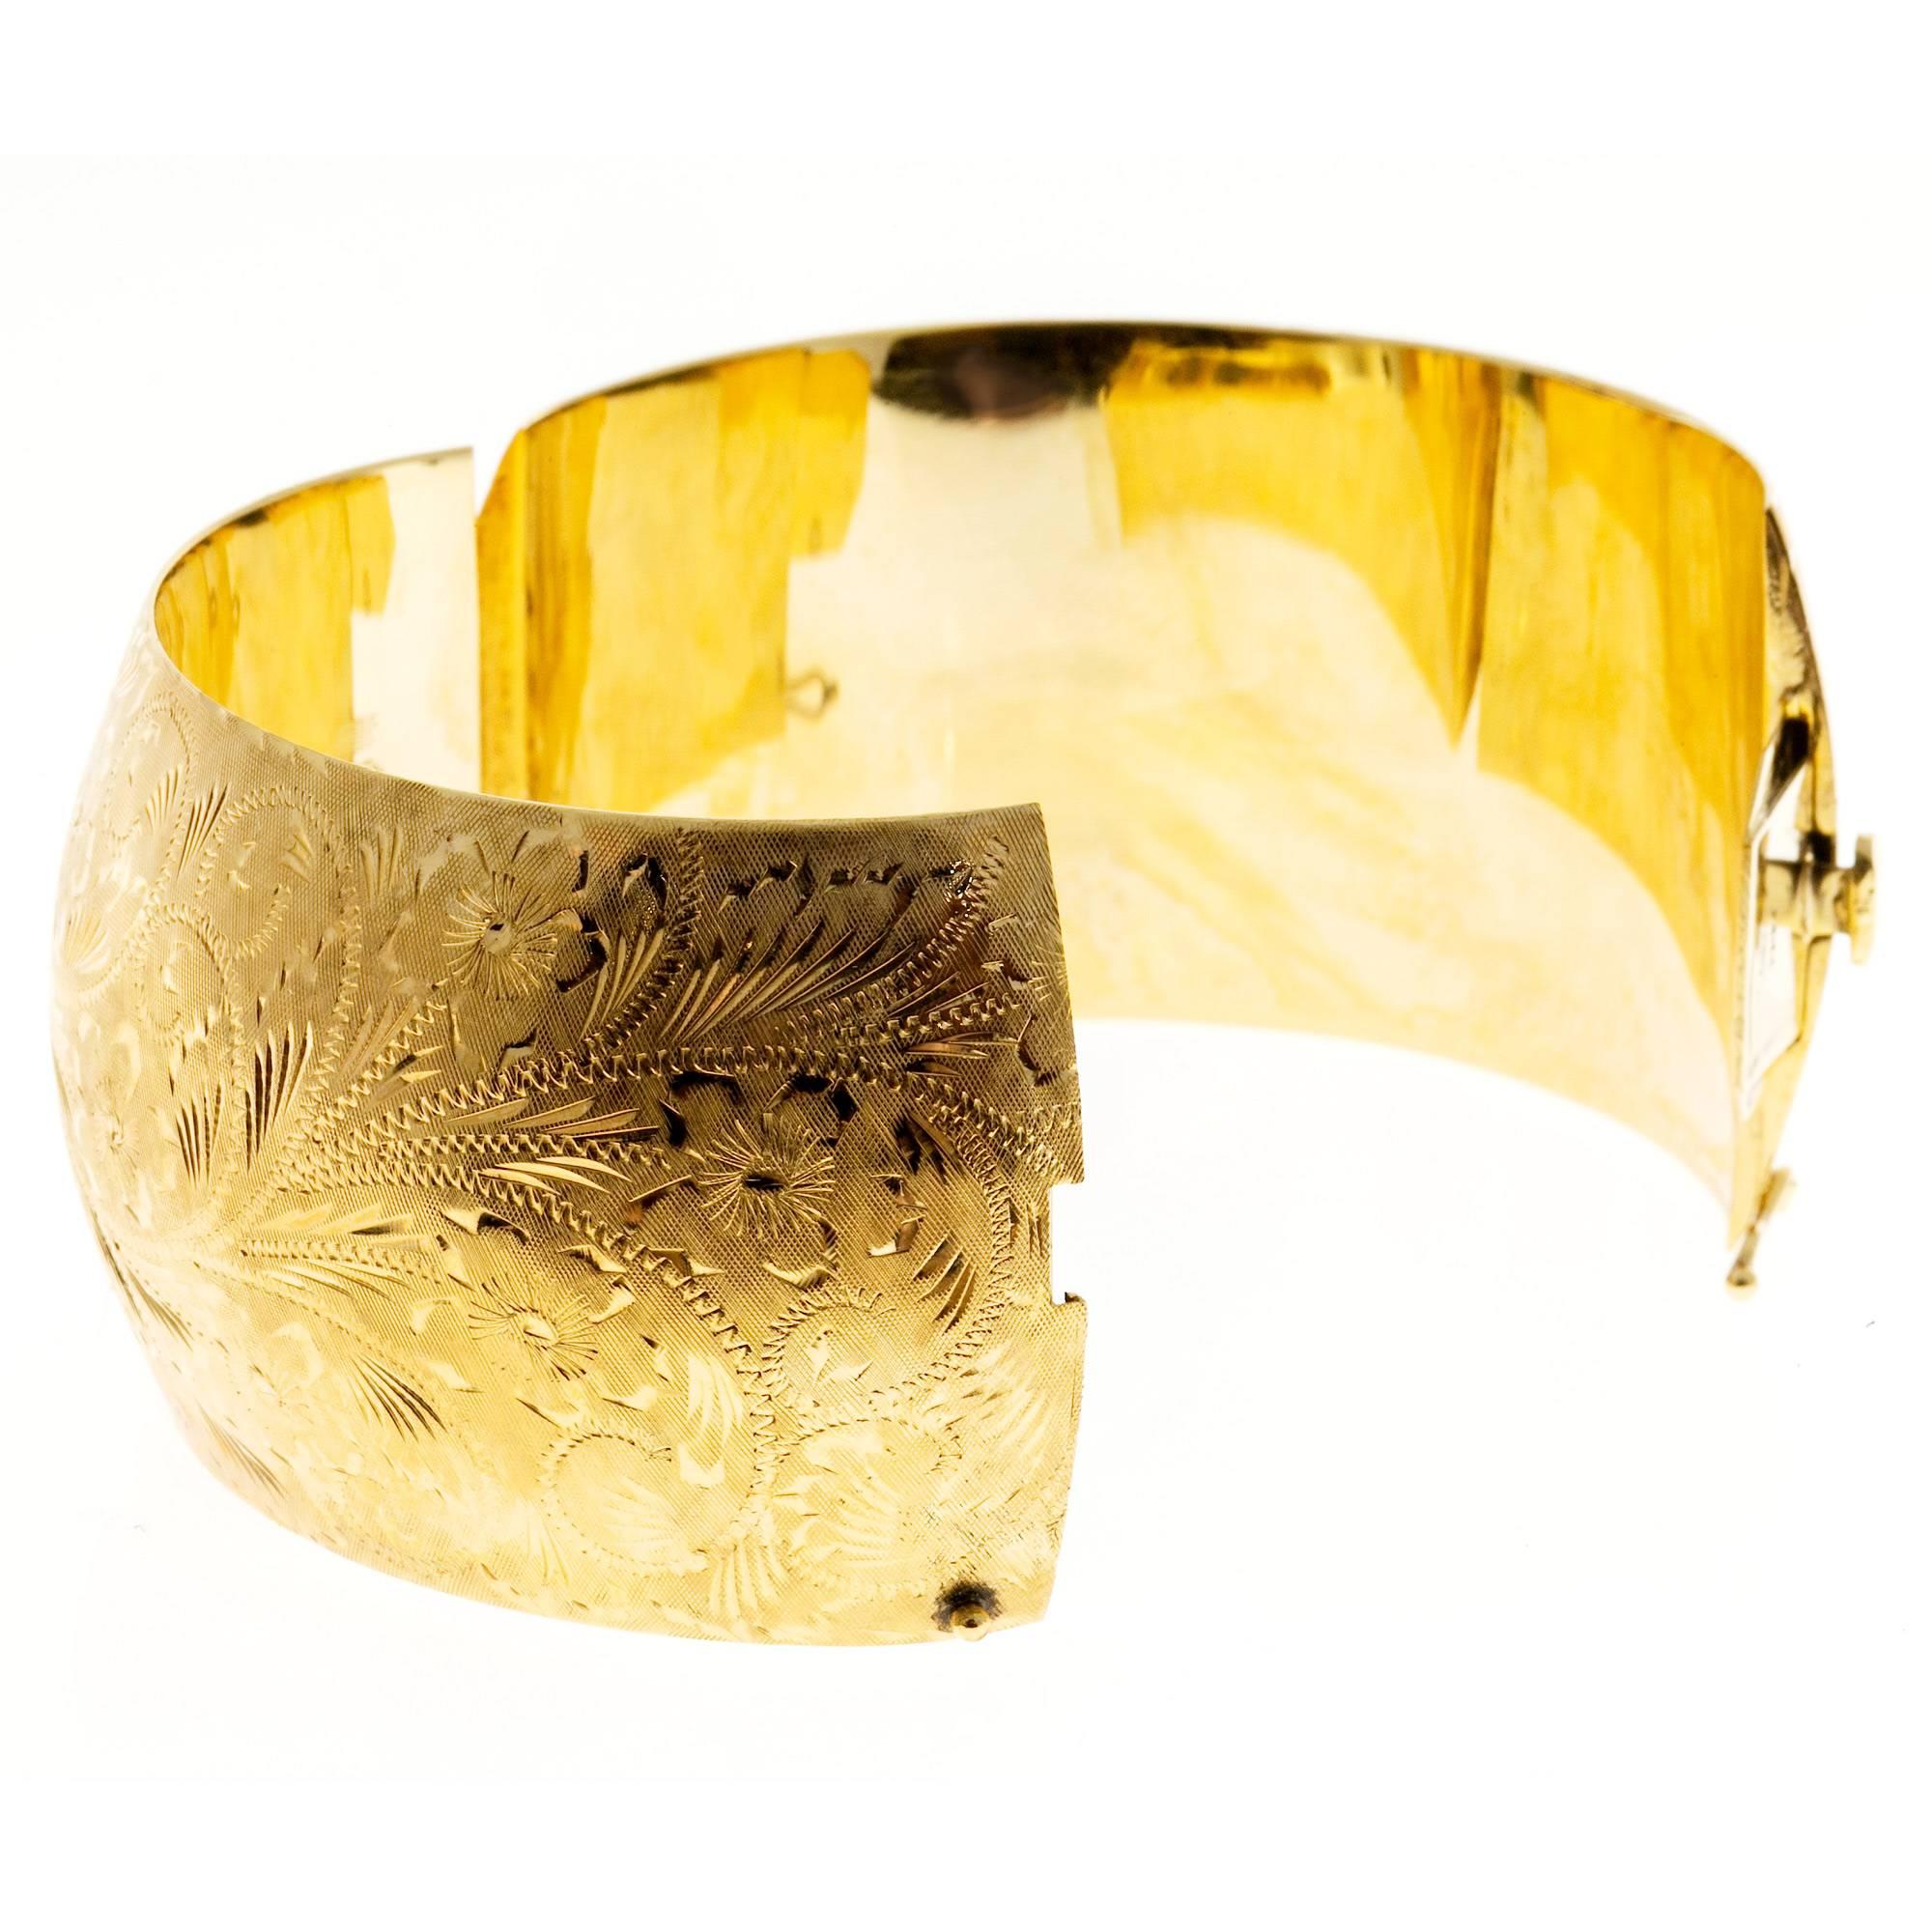 Extra wide beautifully hand engraved 1960’s bangle bracelet. Floral engraving all around. Figure 8 safety. Secure catch and hinge.

14k yellow gold
75.3 grams
Tested and stamped: 14k
Hallmark: MS
Stamped: 5.93mm
Inside dimensions: 2.38 x 2.06